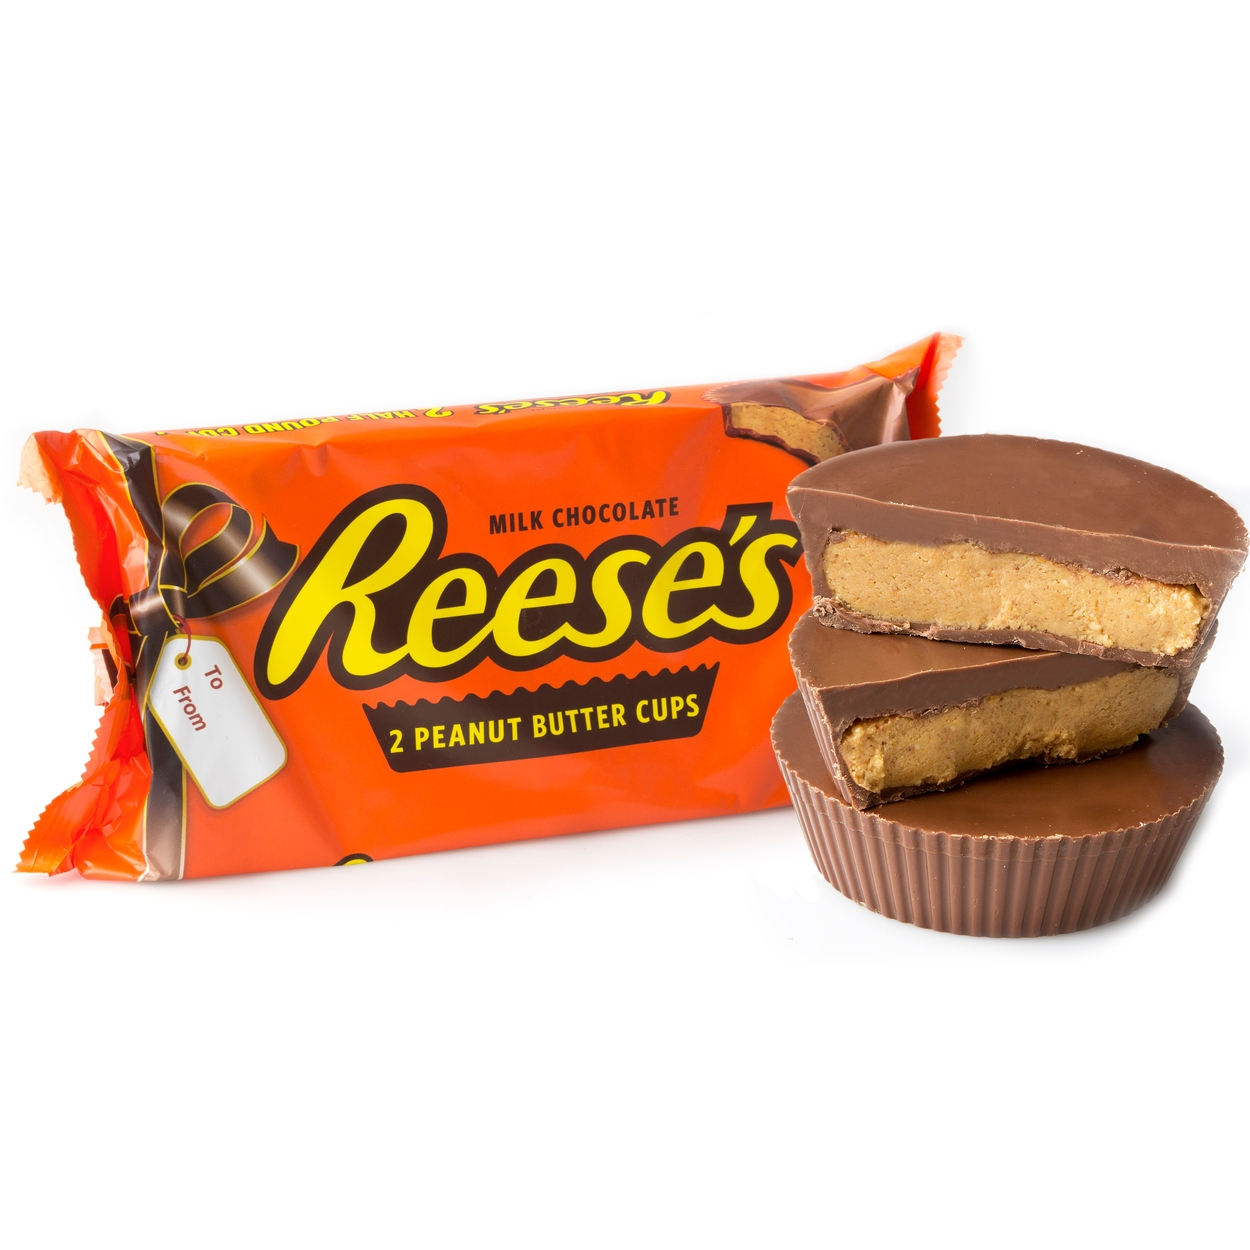 Giant Reese's Peanut Butter Cup 2 8oz Cups • Chocolate Candy Delights